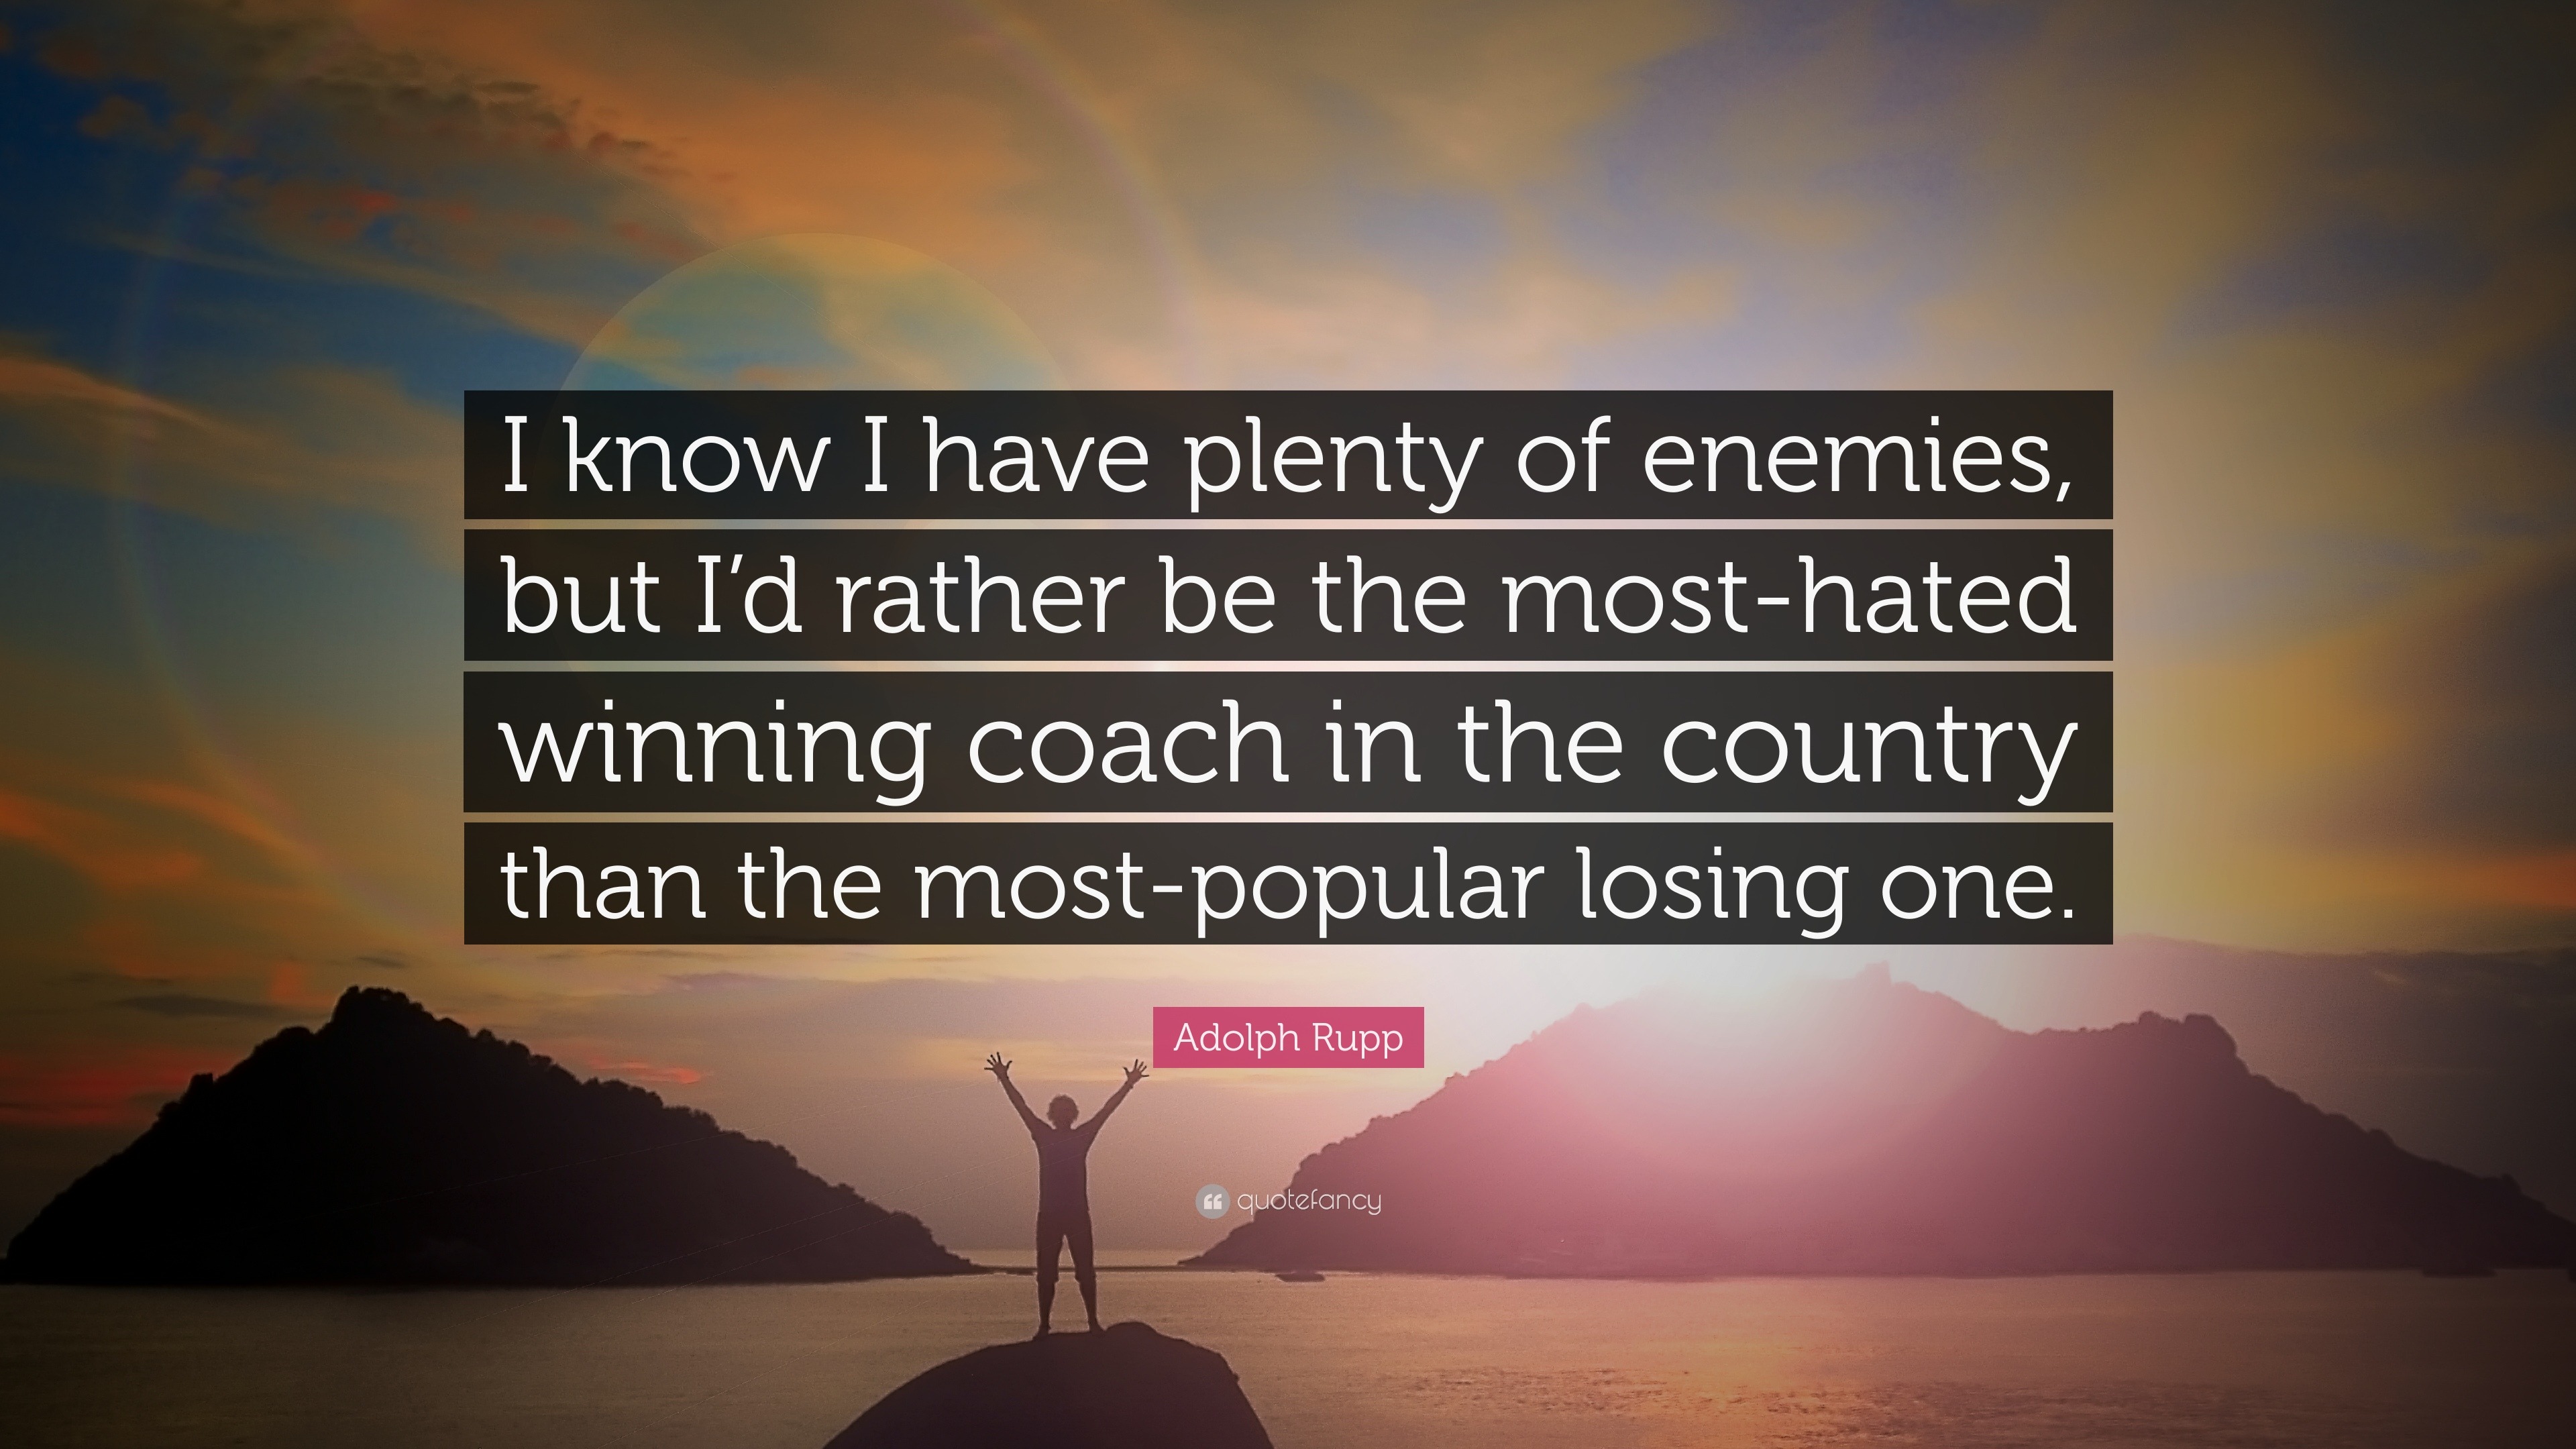 Adolph Rupp Quote: “I know I have plenty of enemies, but I'd rather be the  most-hated winning coach in the country than the most-popular los...”